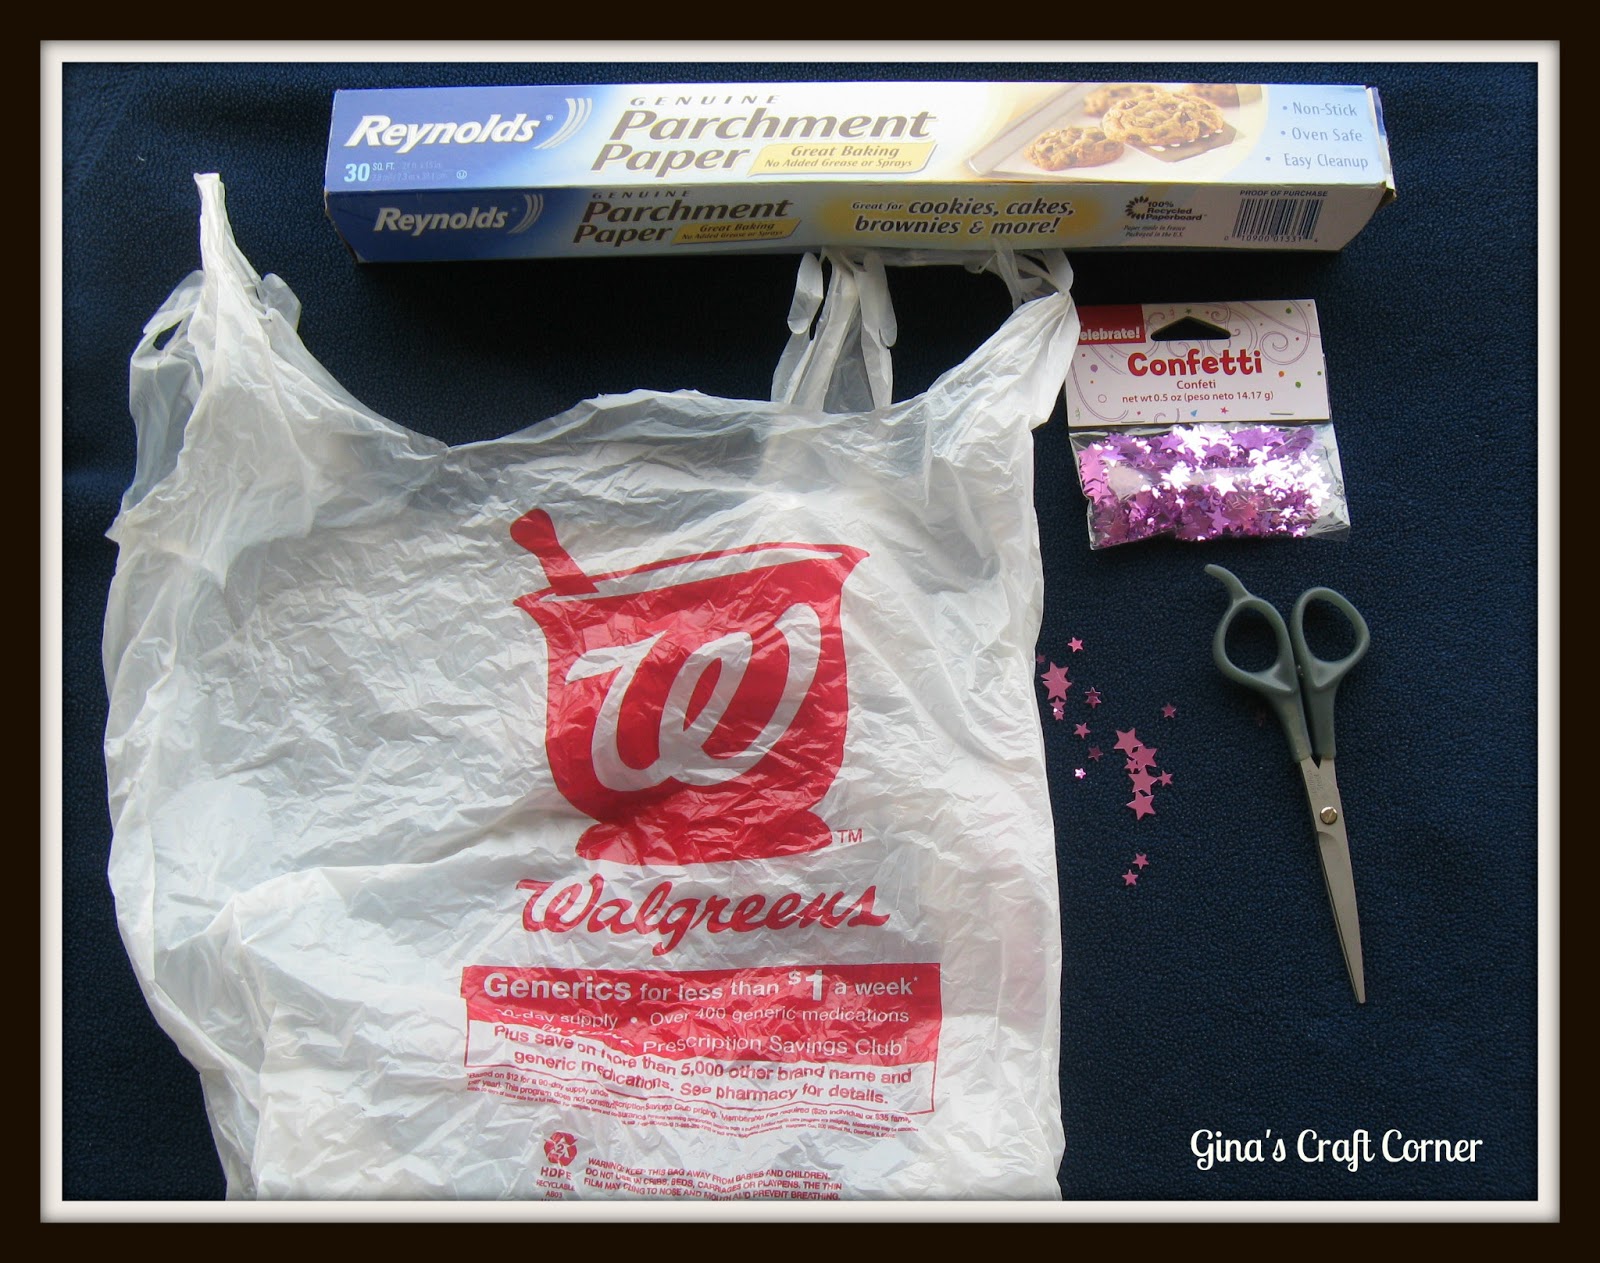 How to Make Fabric From Fused Plastic Bags (Free DIY!) - Craft